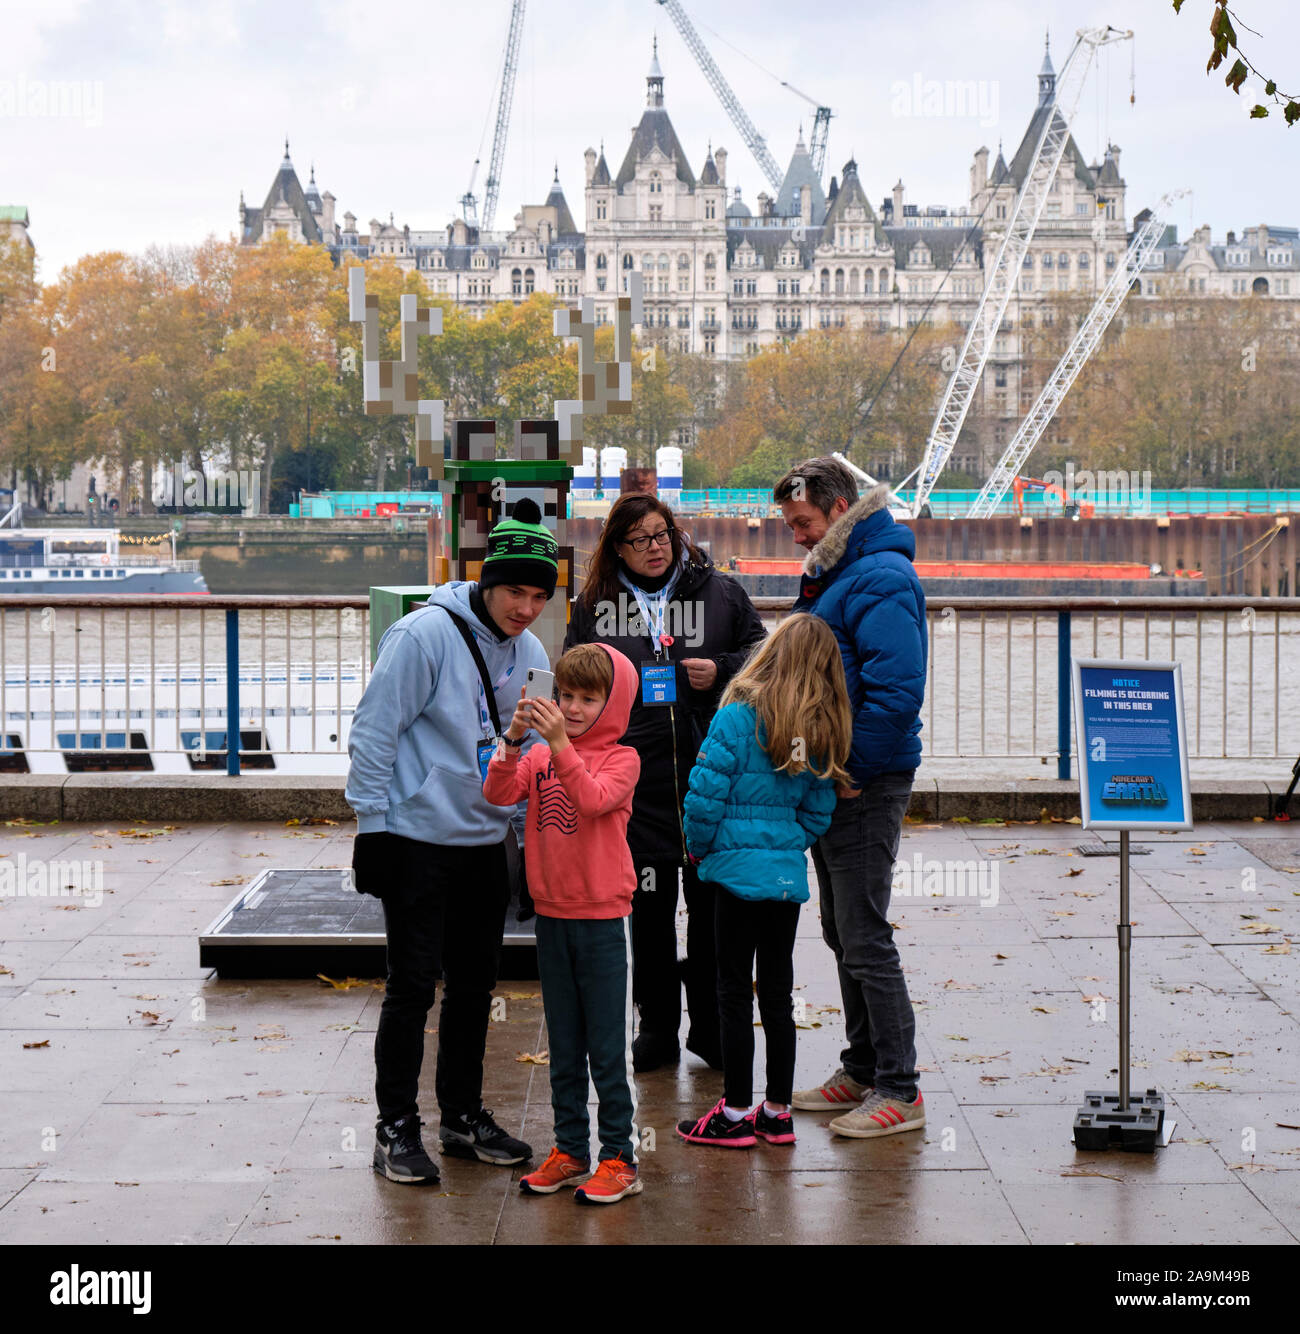 London, UK. 16th November 2019. In Celebration of Minecraft Earth Rollout,  one-of-a-kind, life-sized statues of interactive mobs popping up in London.  The statues are life-sized creations of the Muddy Pig, Moobloom and